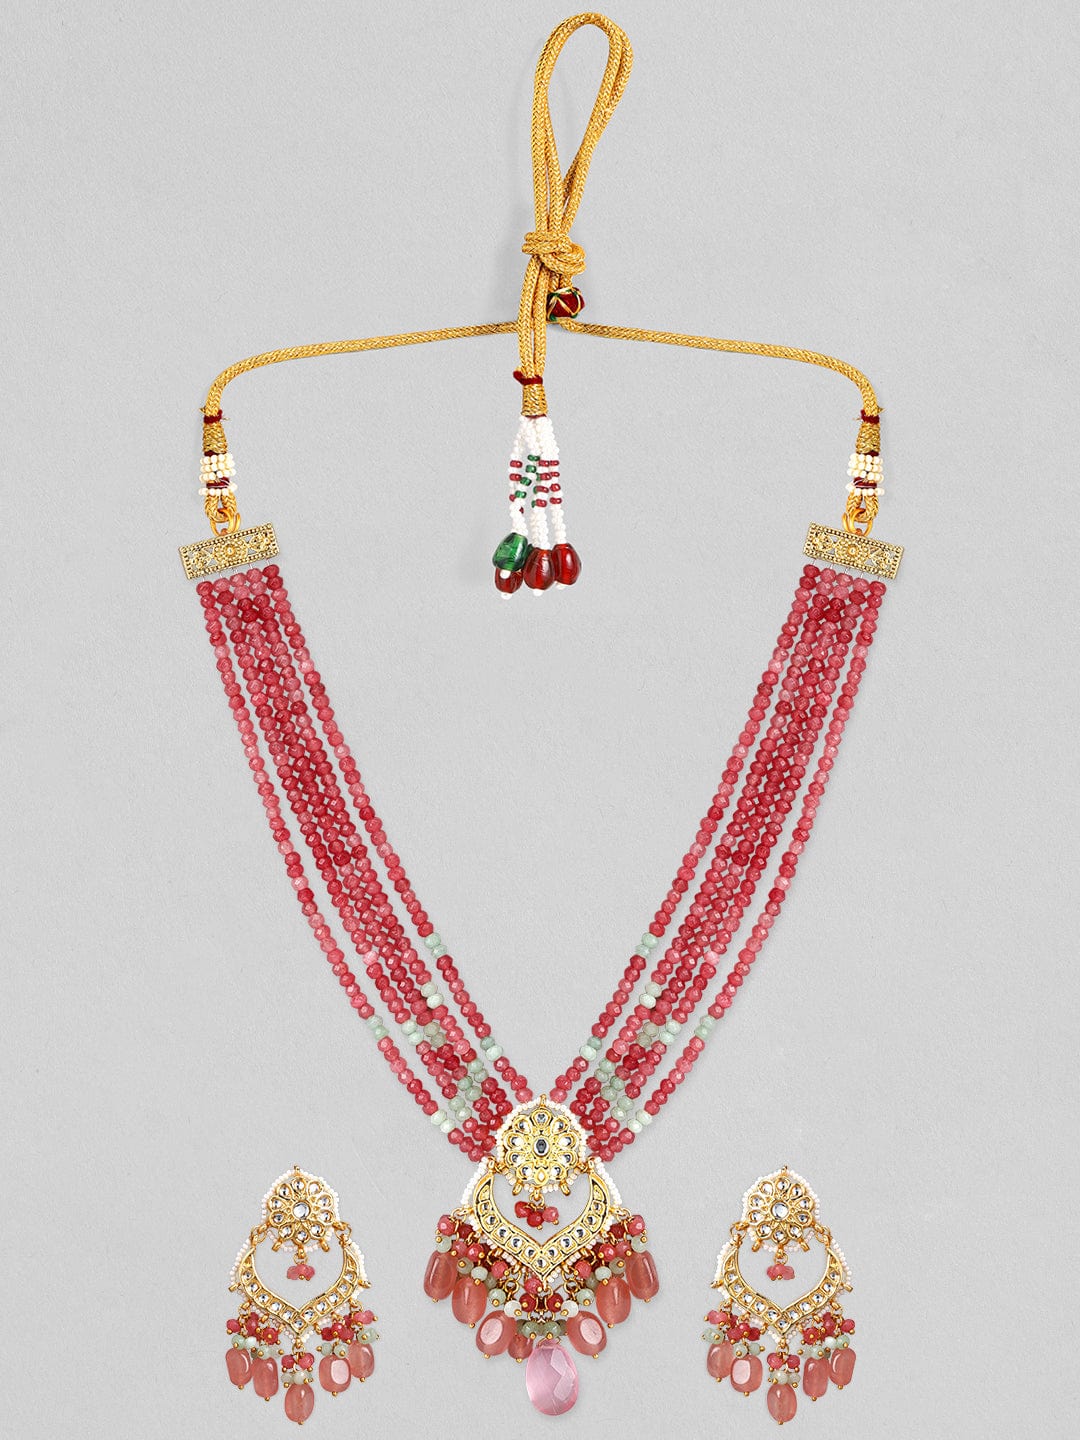 Rubans Luxury Coral red colored Kundan Necklace. Necklace Set